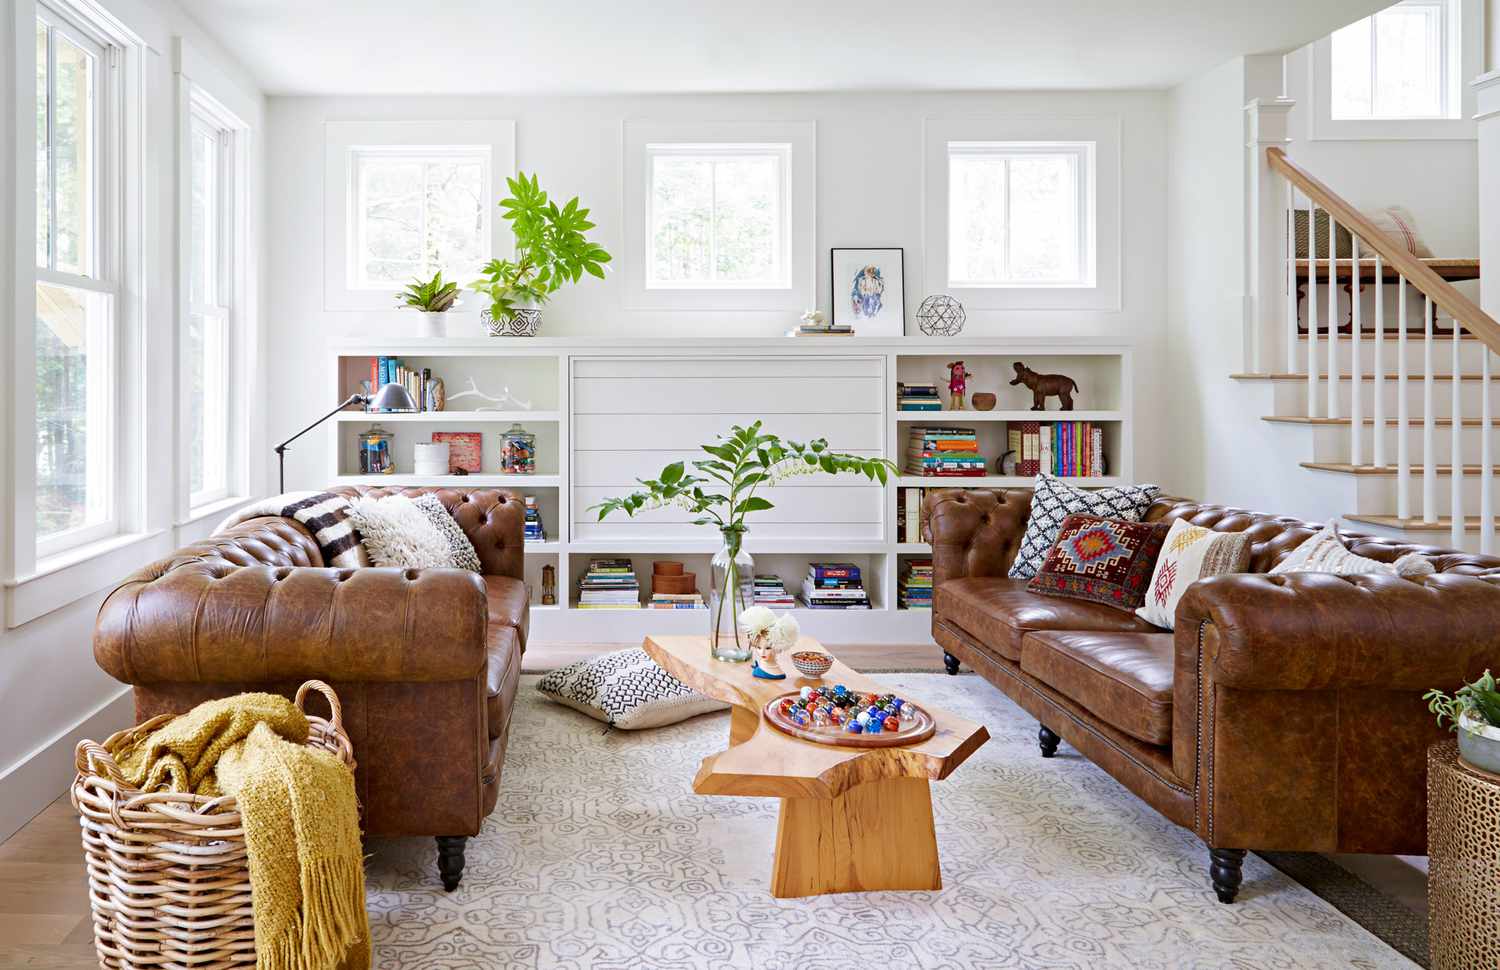 Decorate With A Brown Sofa